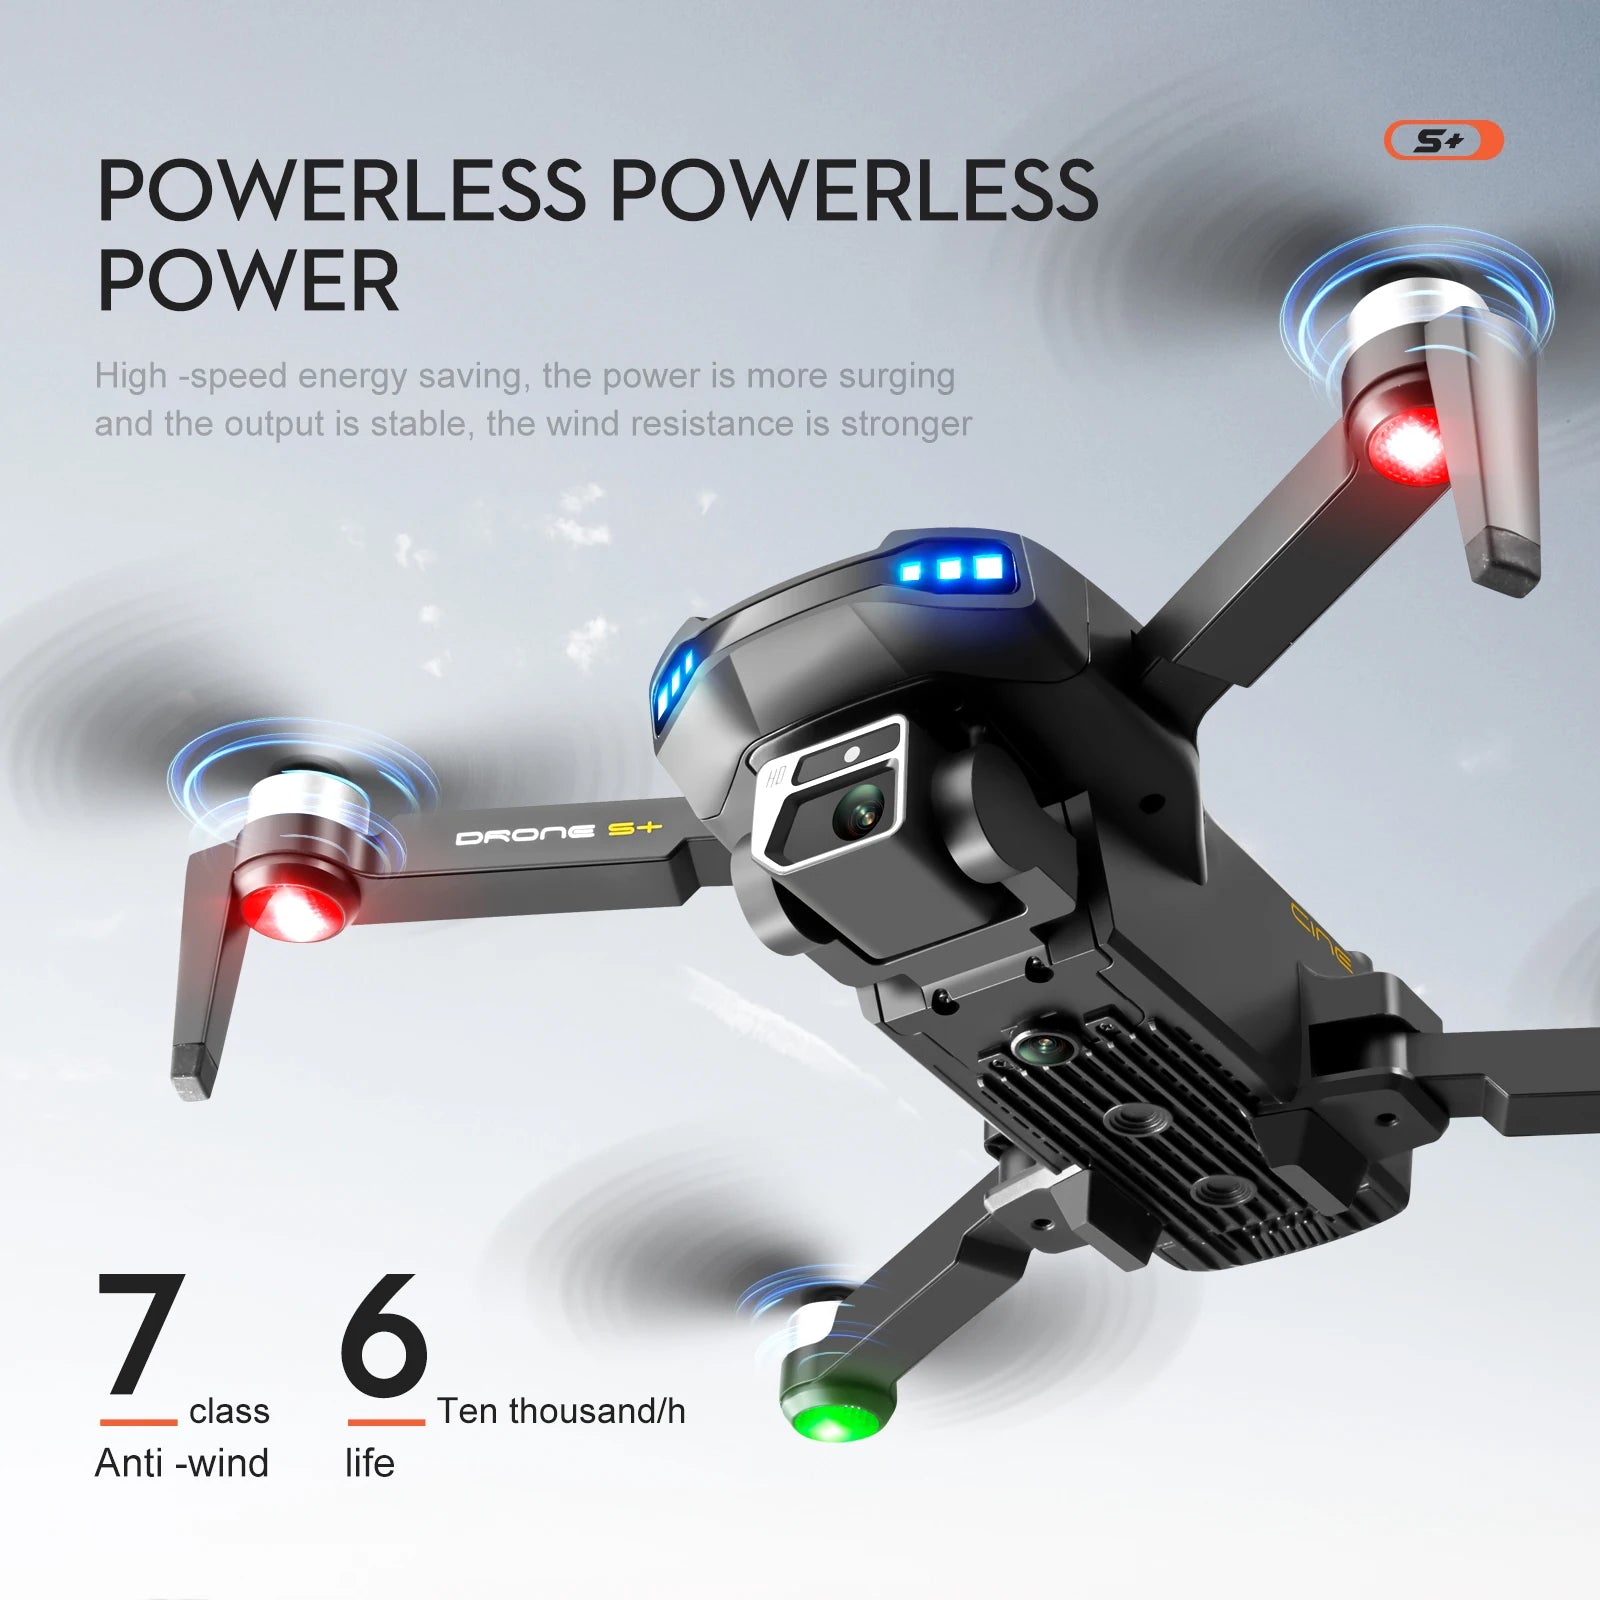 S+ Drone, DRONG 55 class Ten thousand/h Anti-wind life, the power is more sur